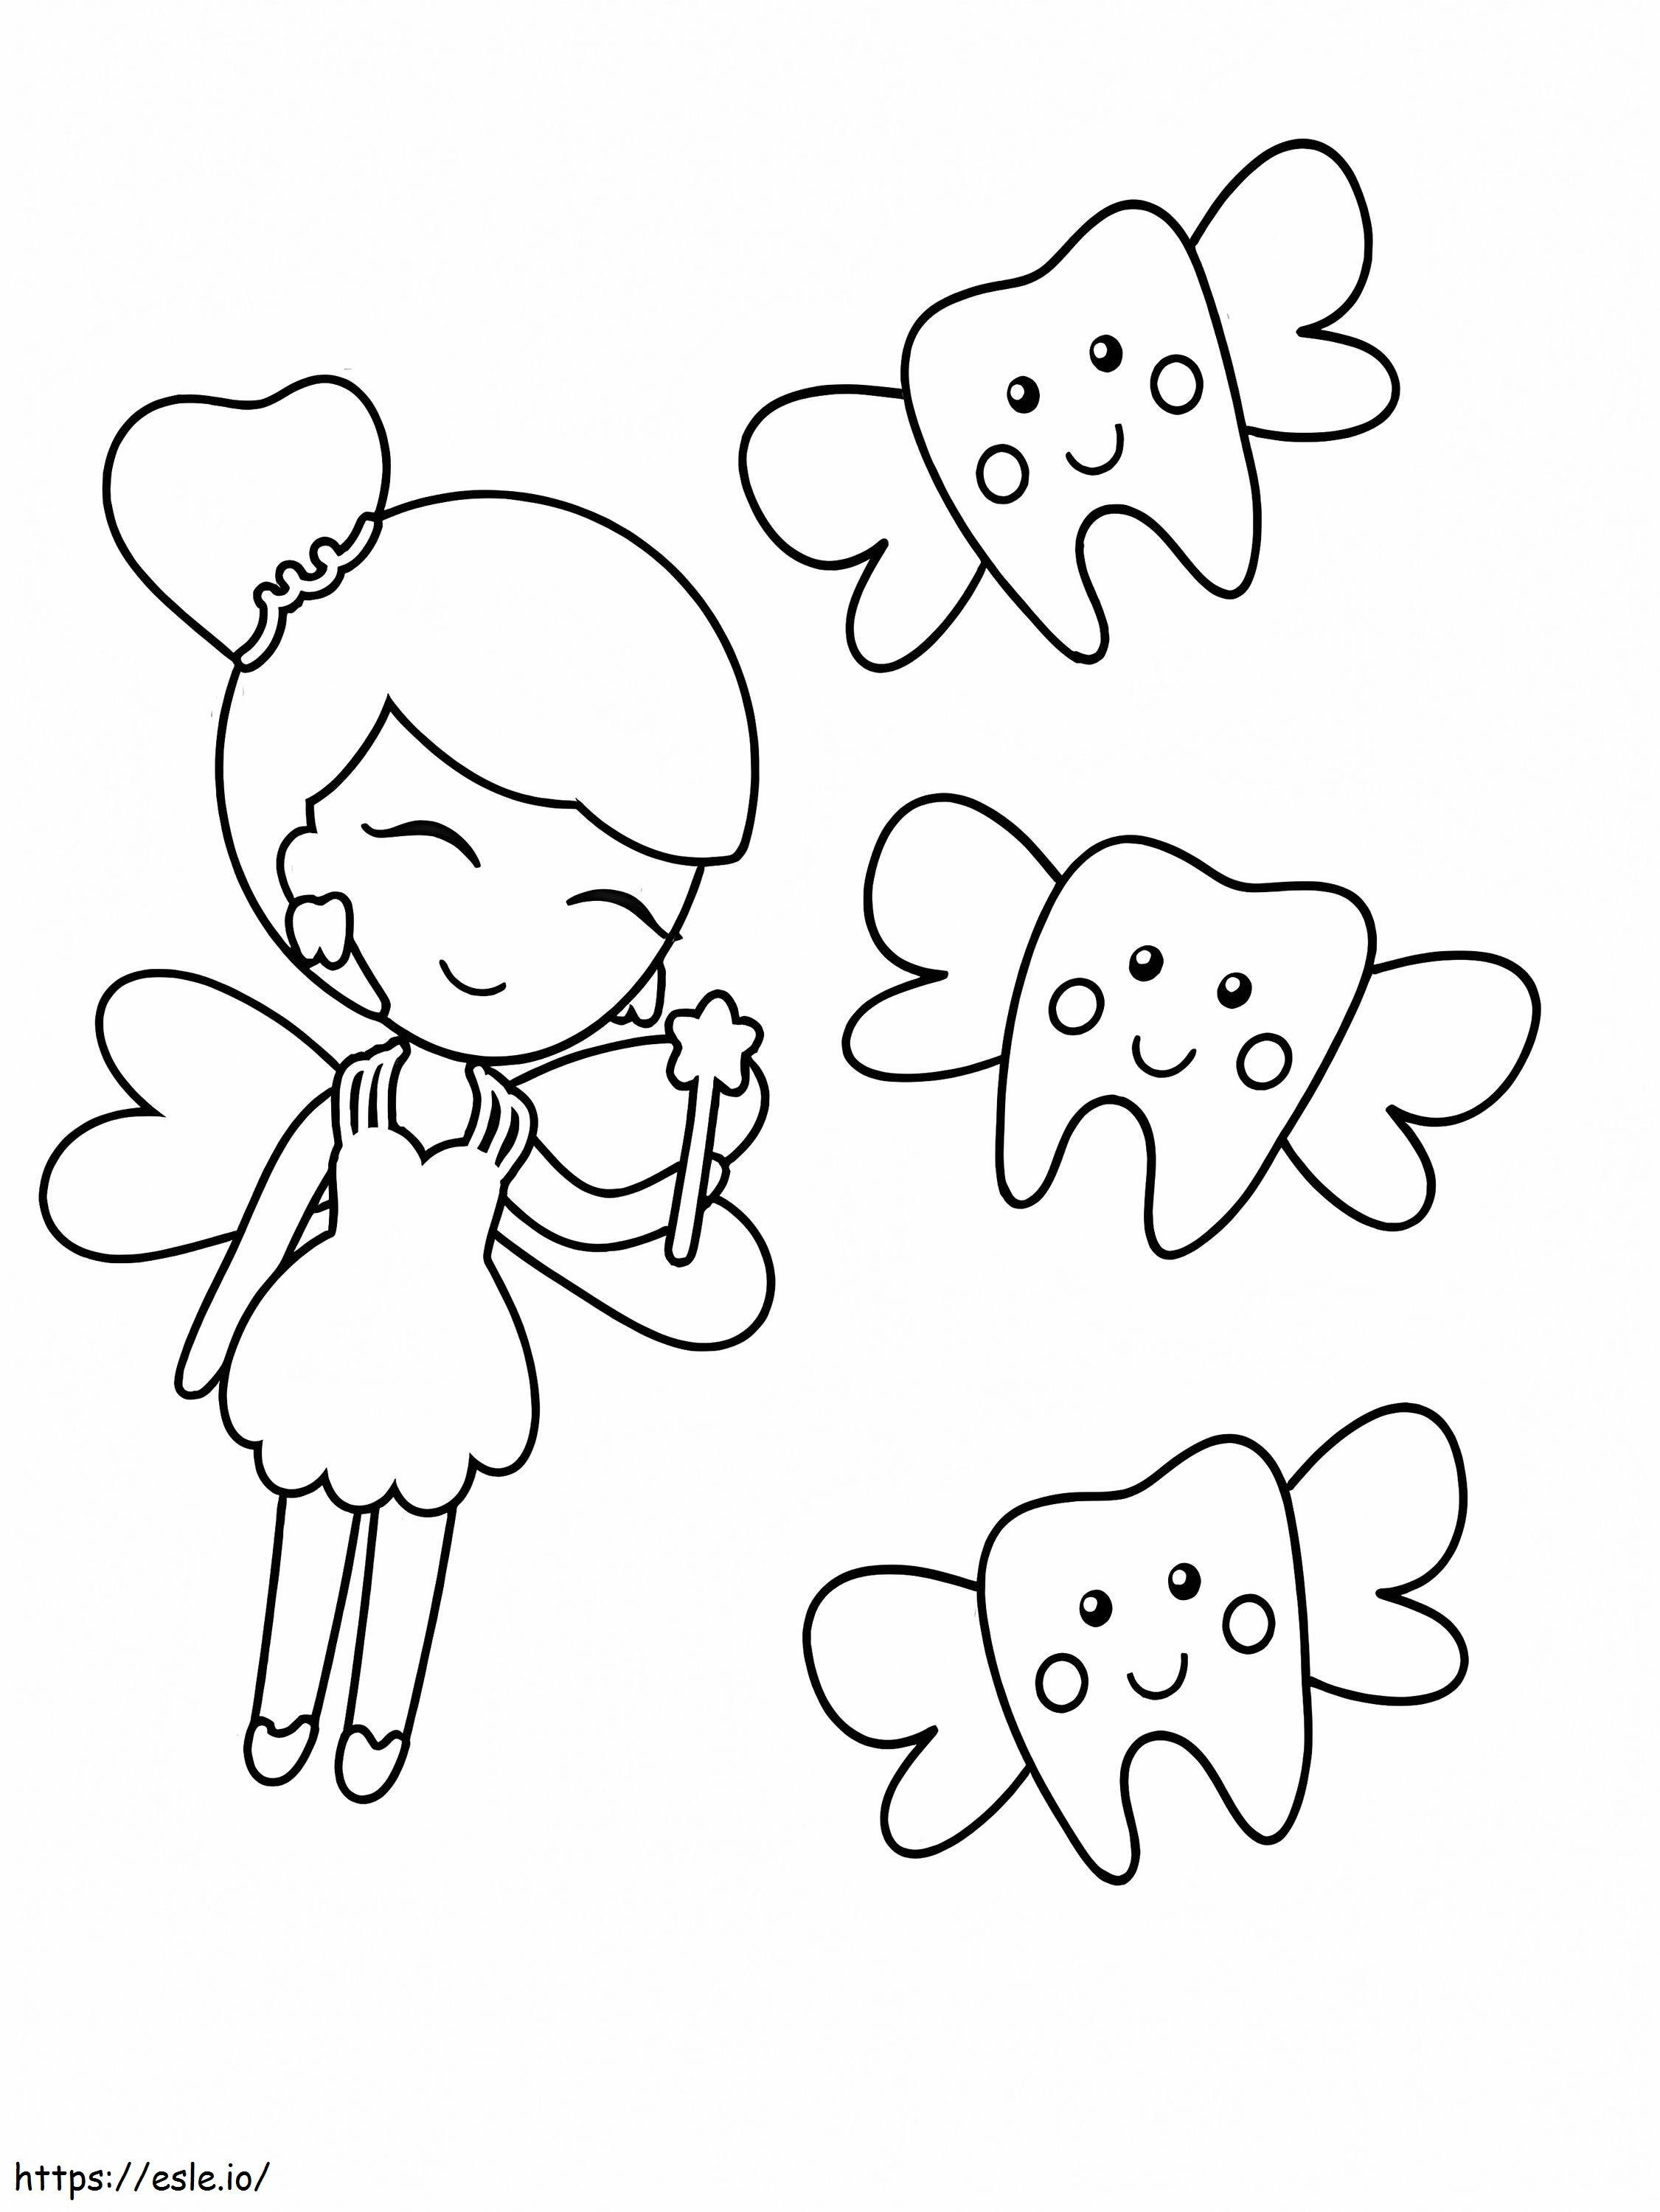 1584071503 Tooth Fairy 4 791X1024 1 coloring page